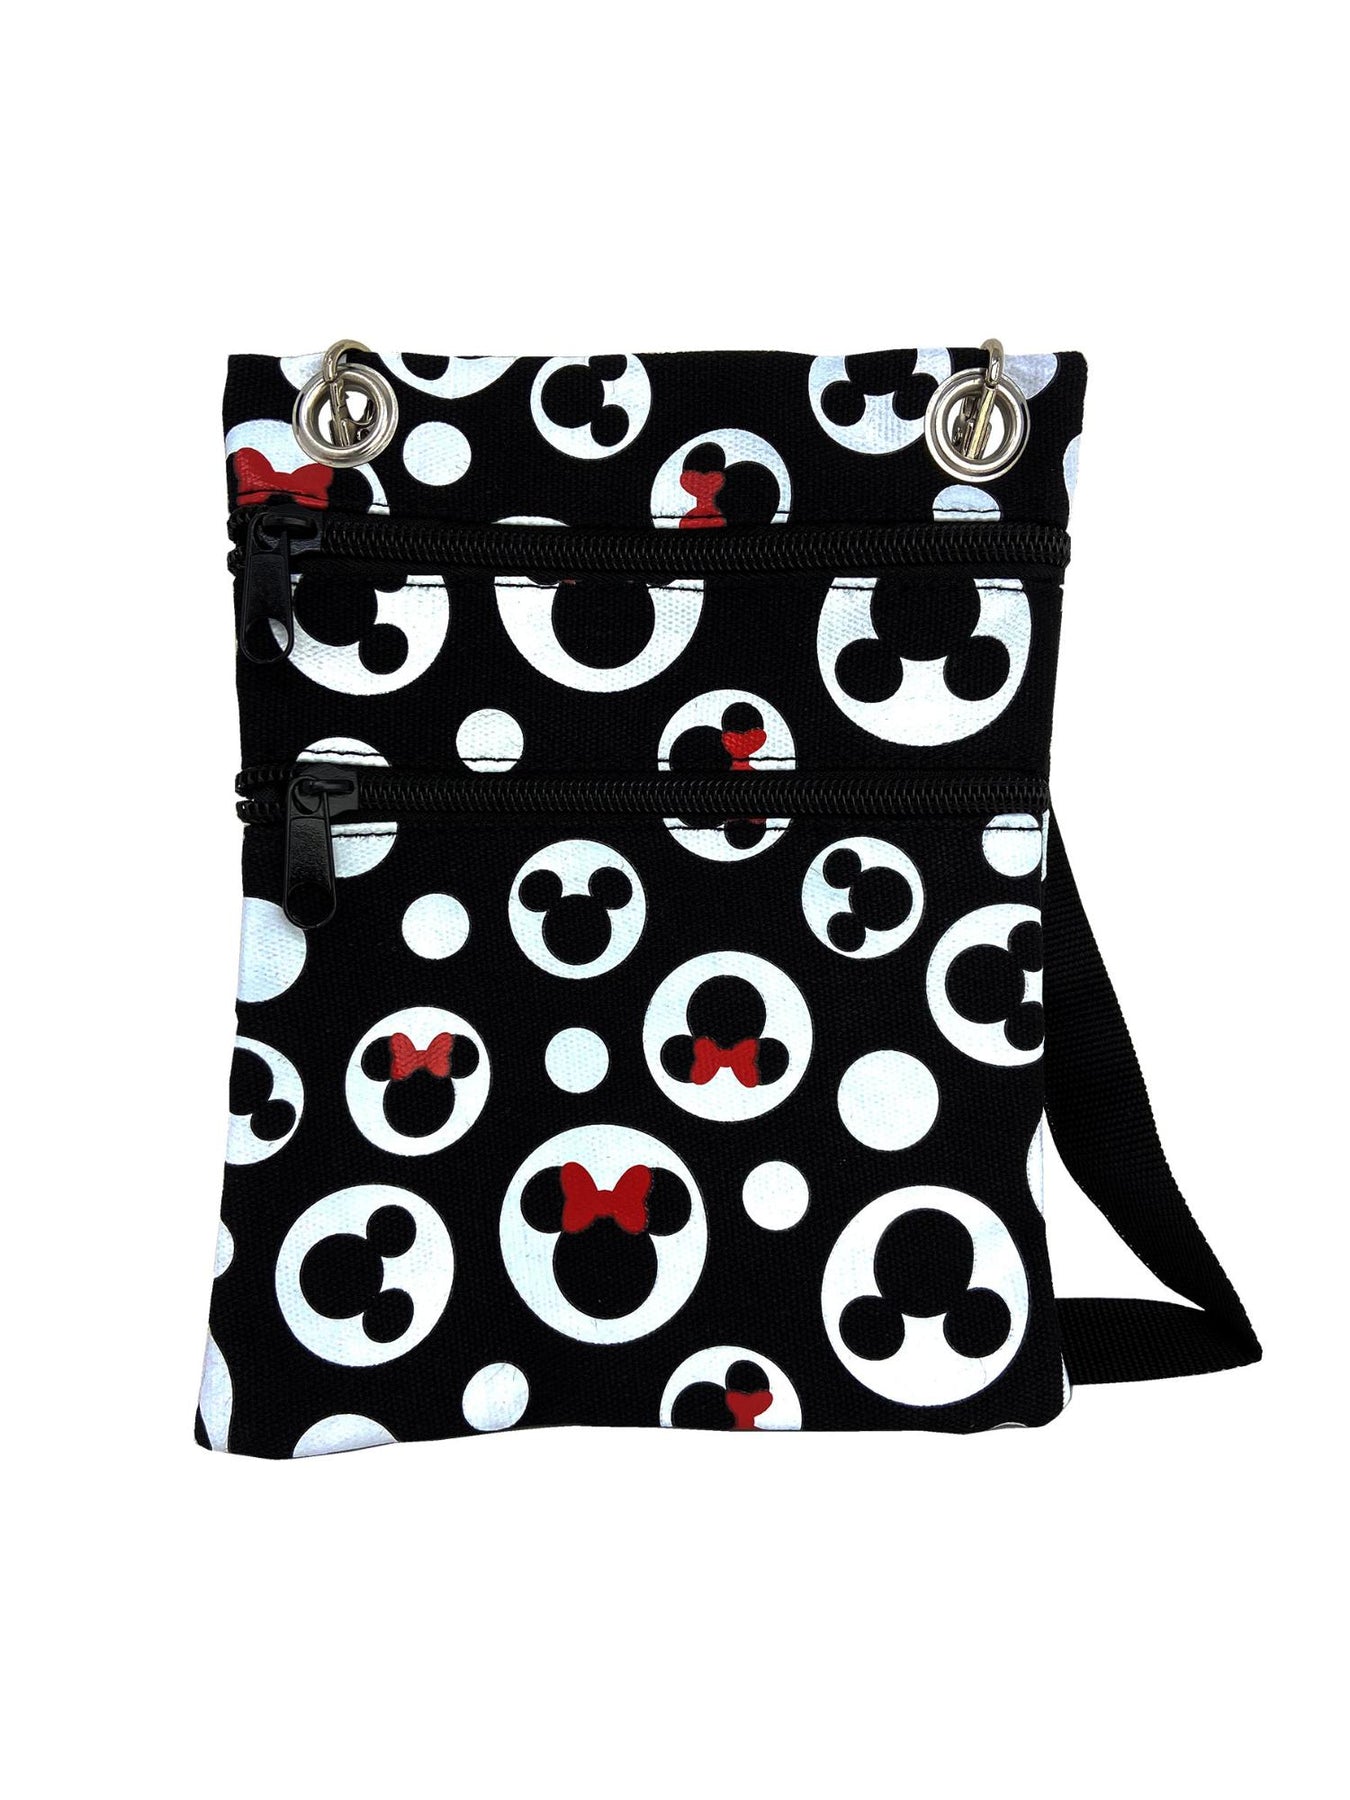 Disney Mickey & Minnie Mouse Passport Bag All-Over Print Travel